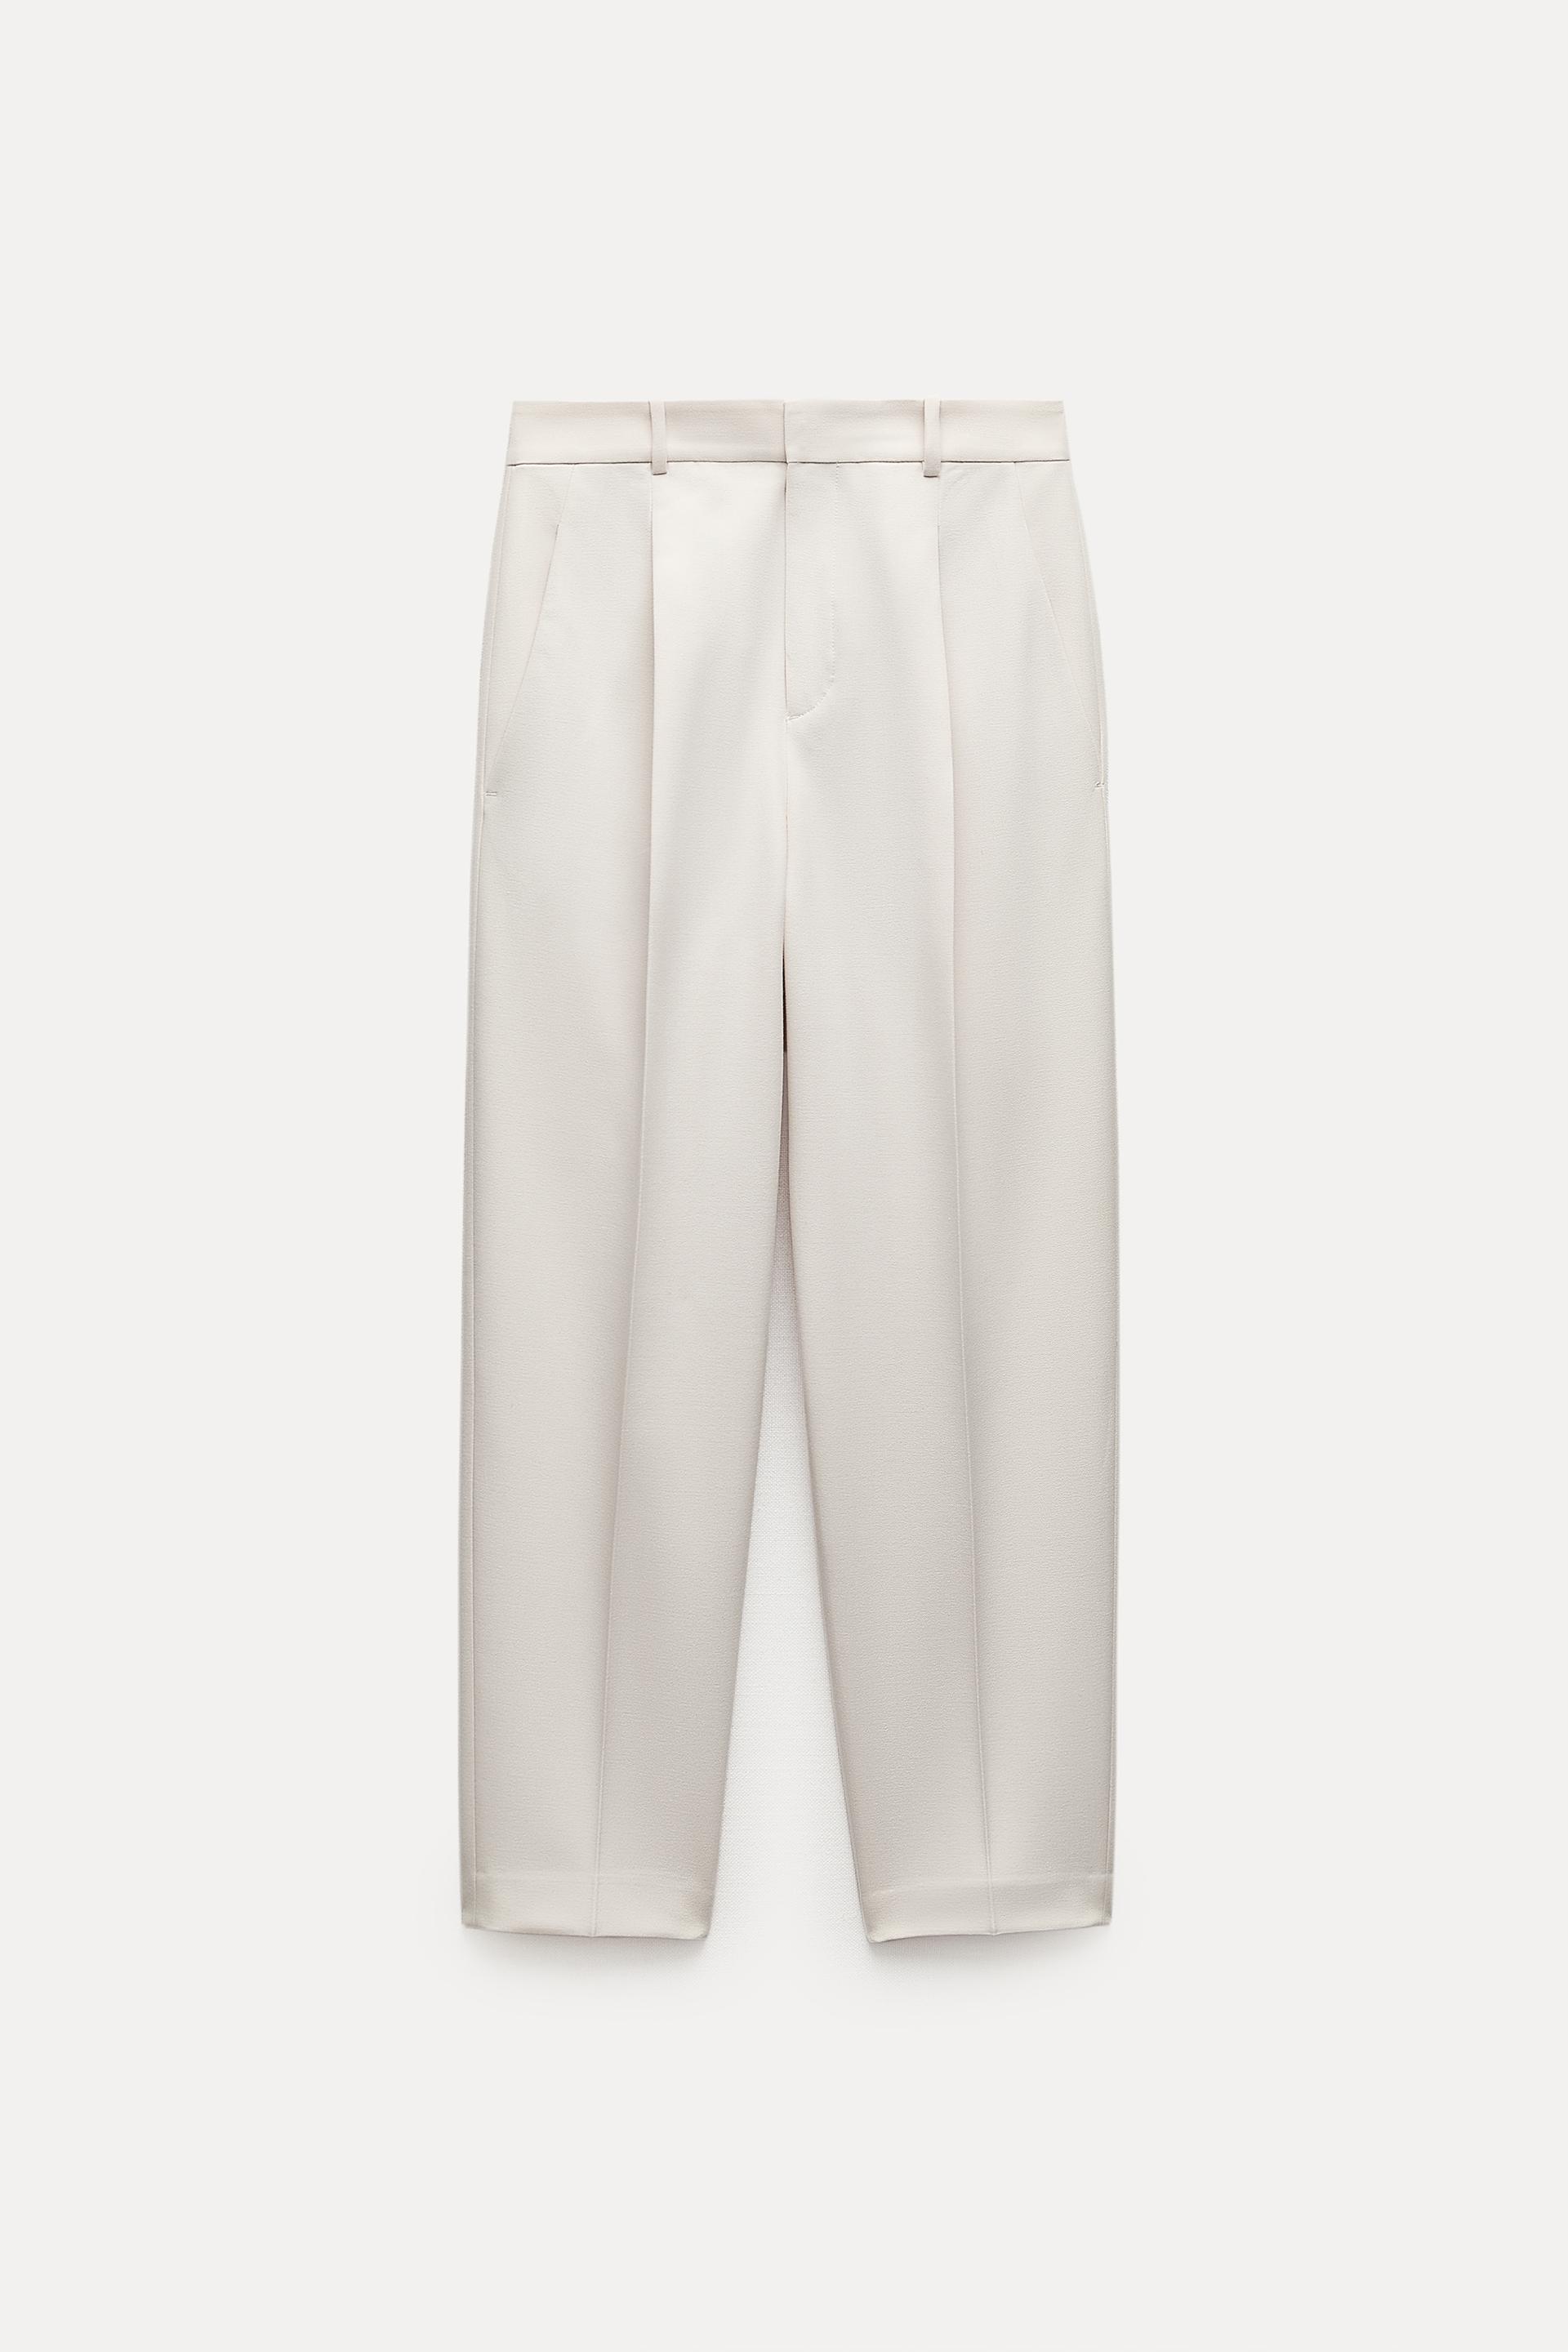 ZARA Womens High-Waist Trousers (Mint) in Lucknow at best price by